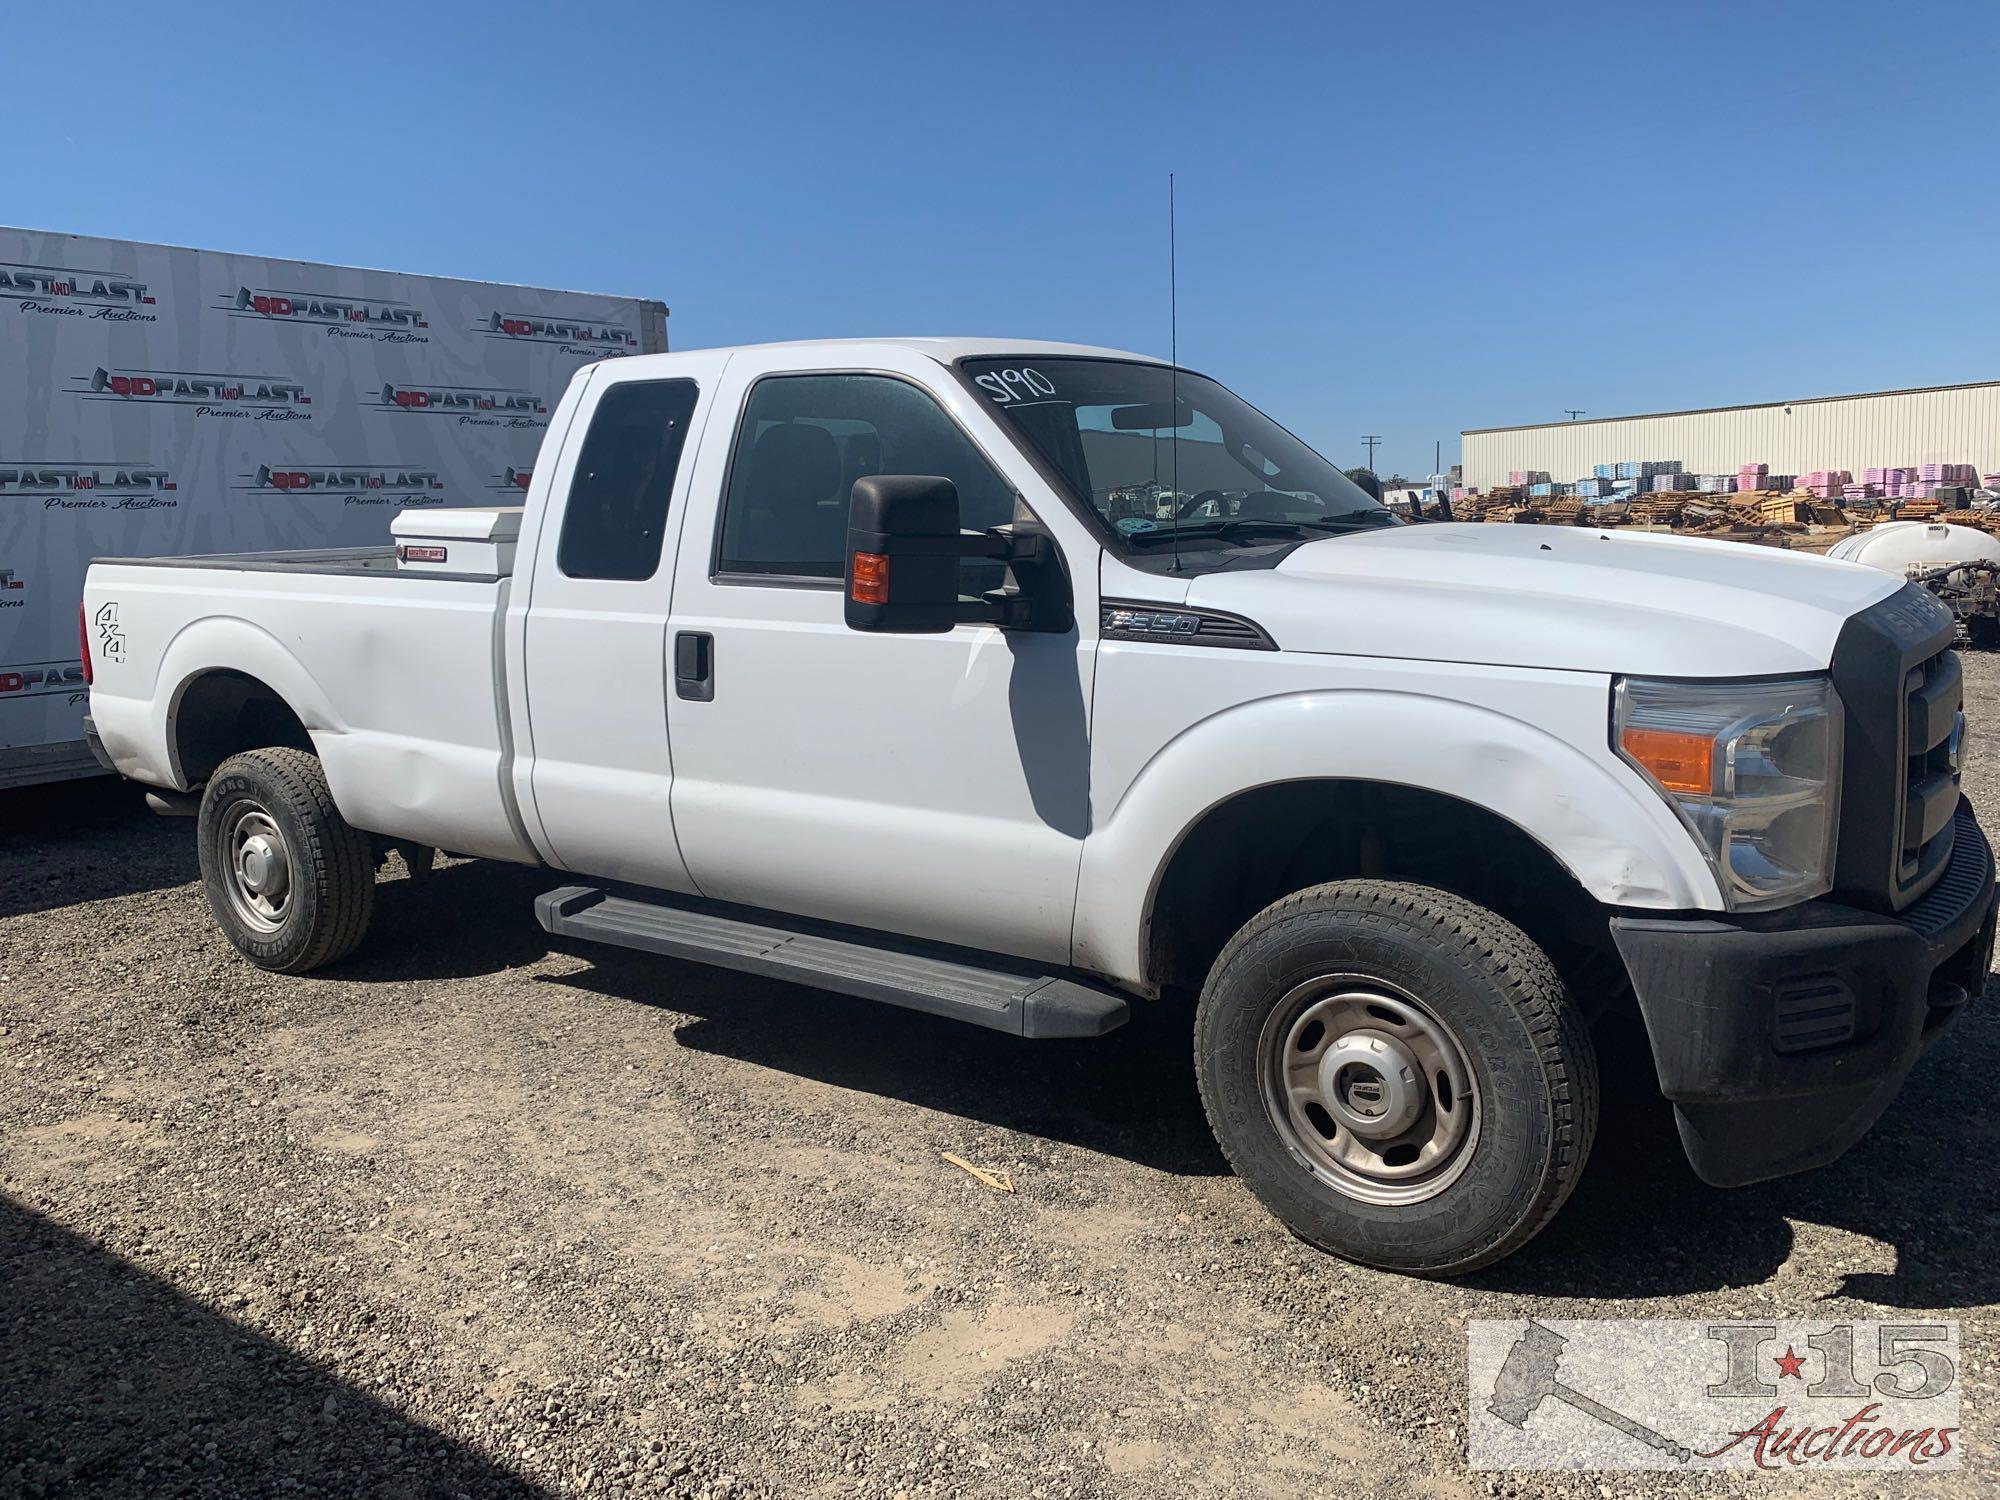 2012 Ford F-350, White CURRENT SMOG